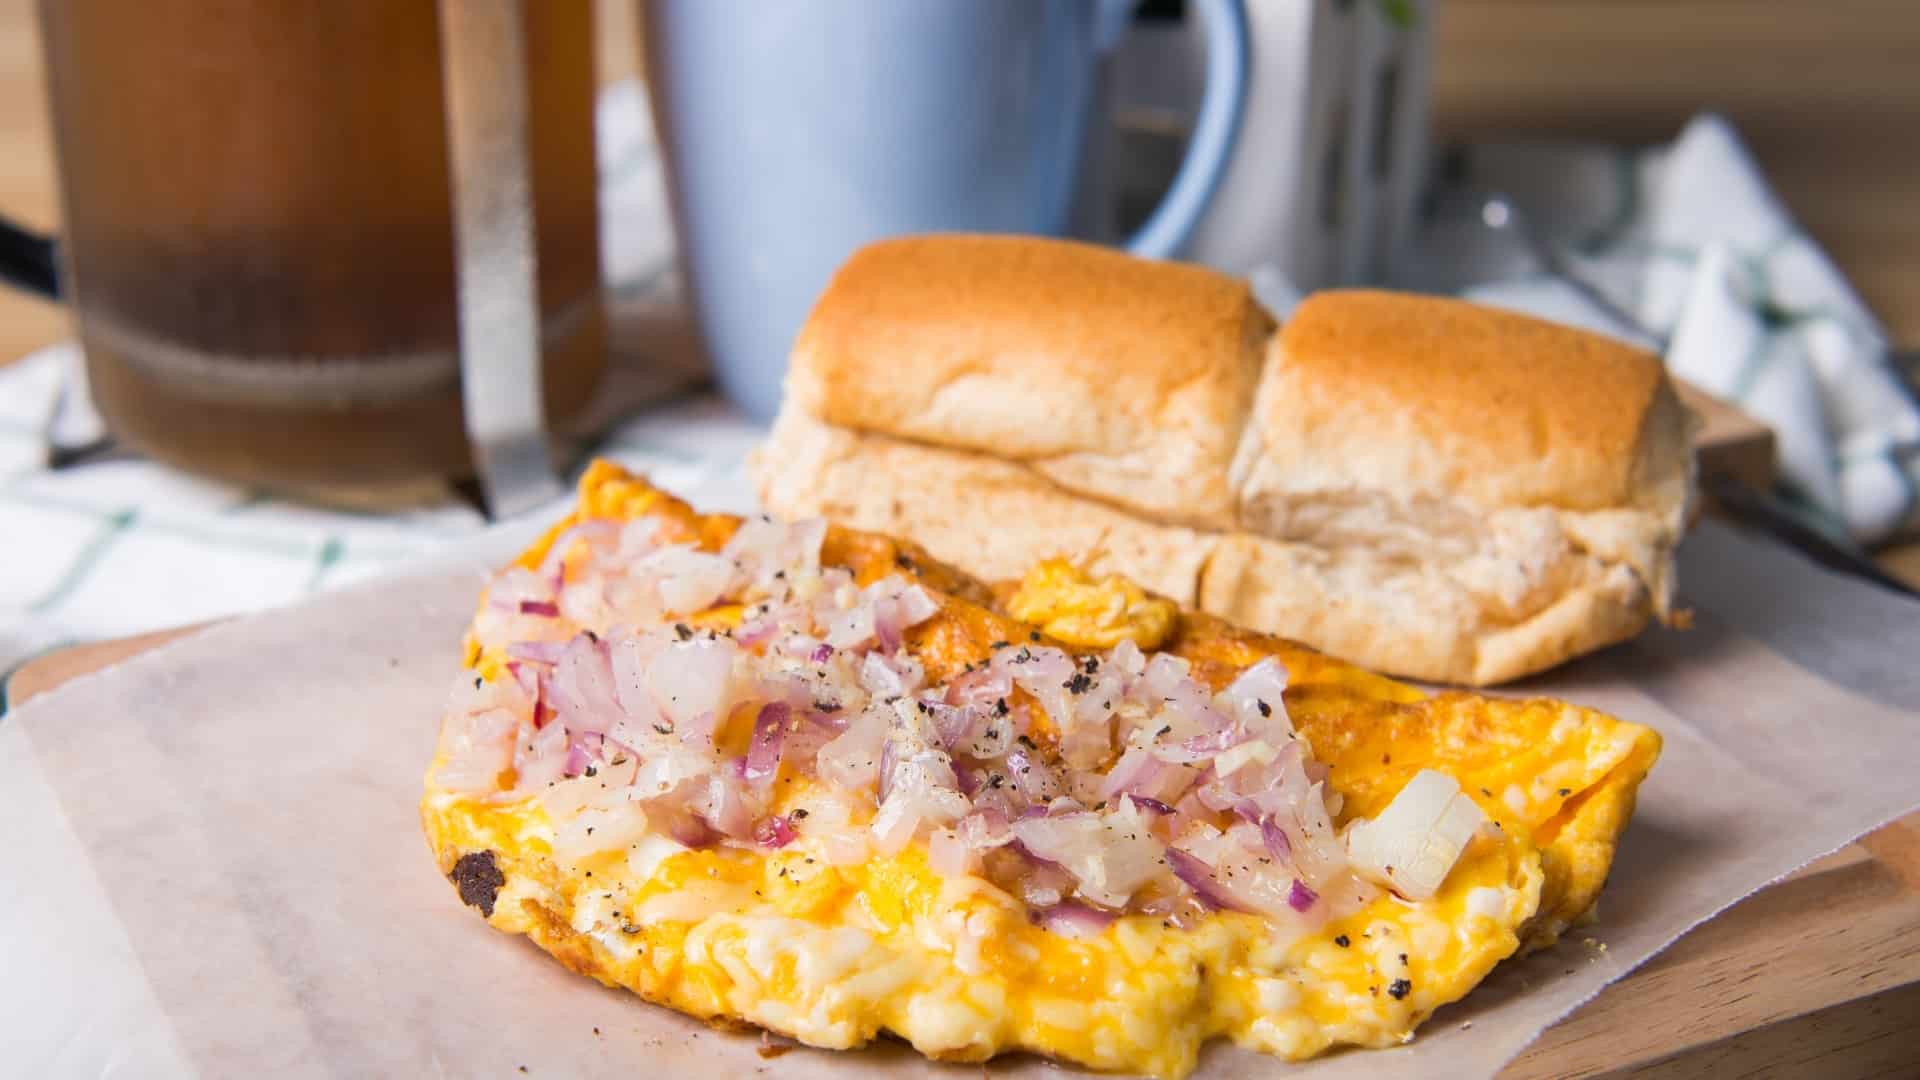 Omelet on a pandesal bread